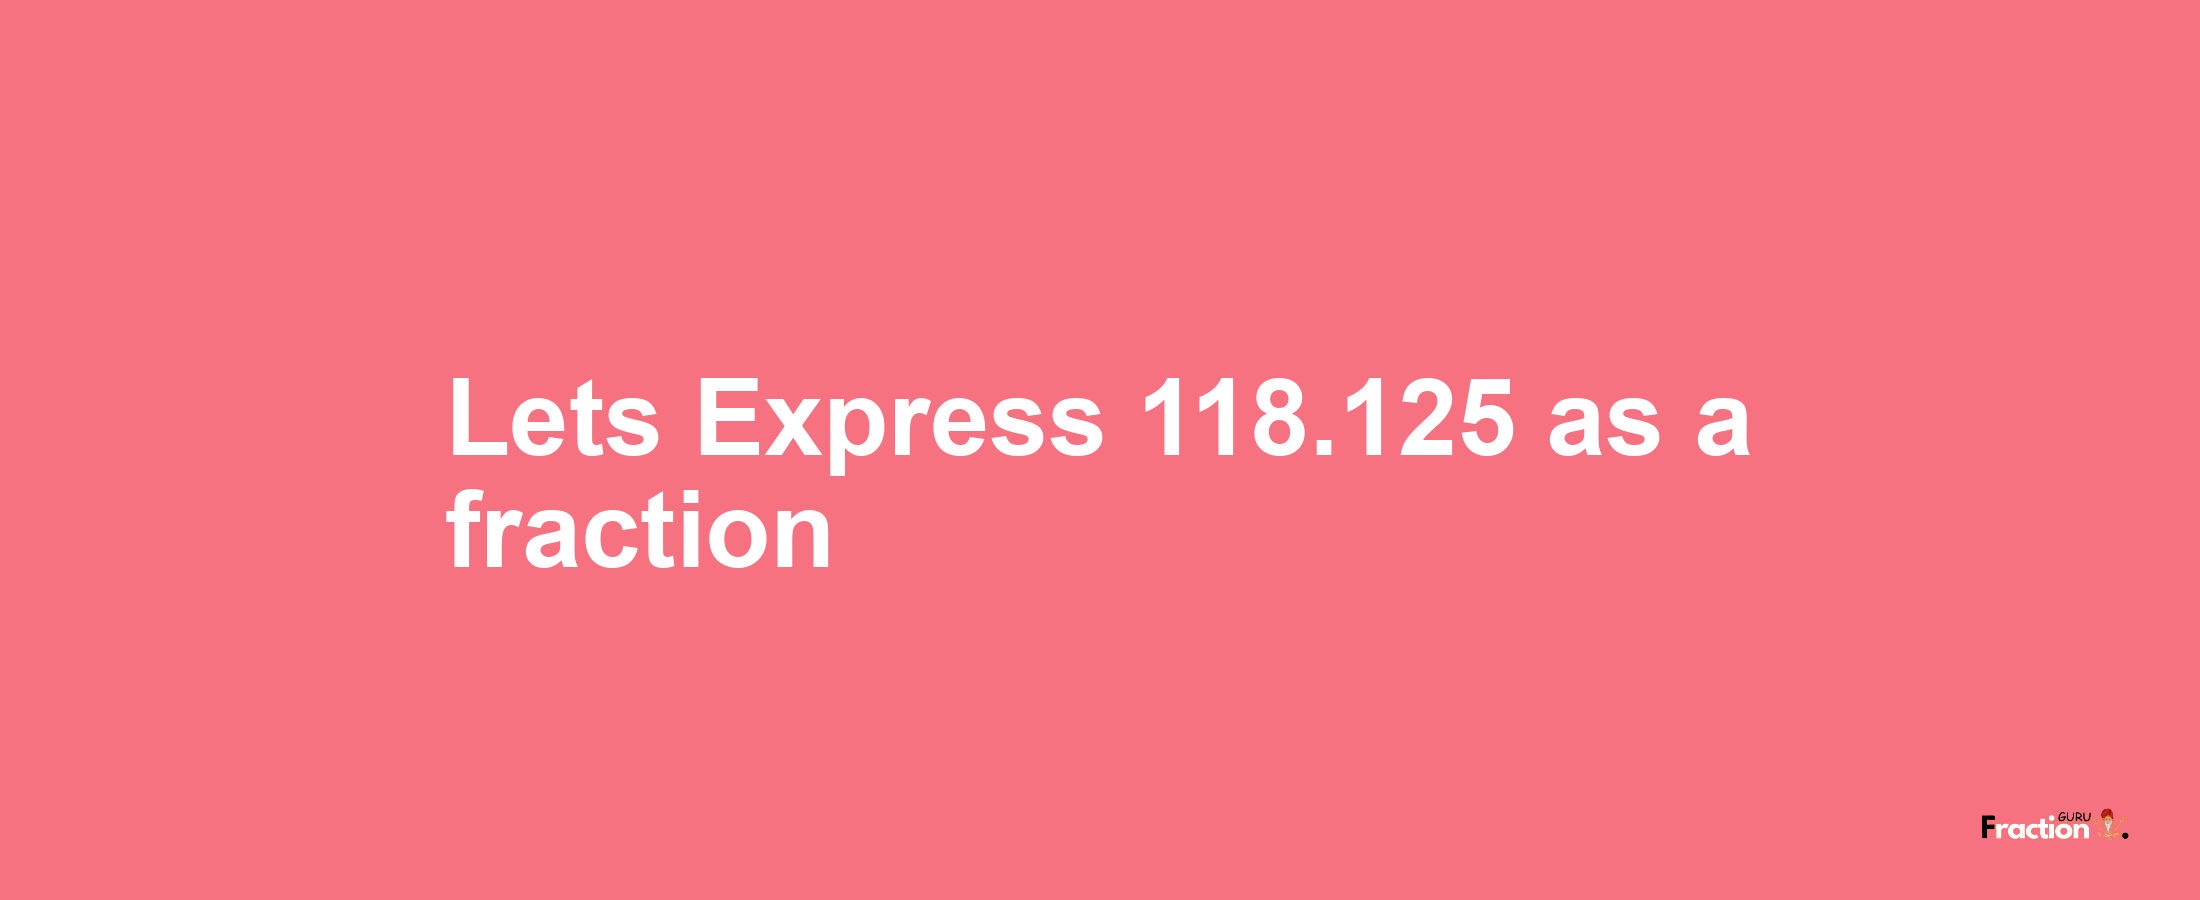 Lets Express 118.125 as afraction